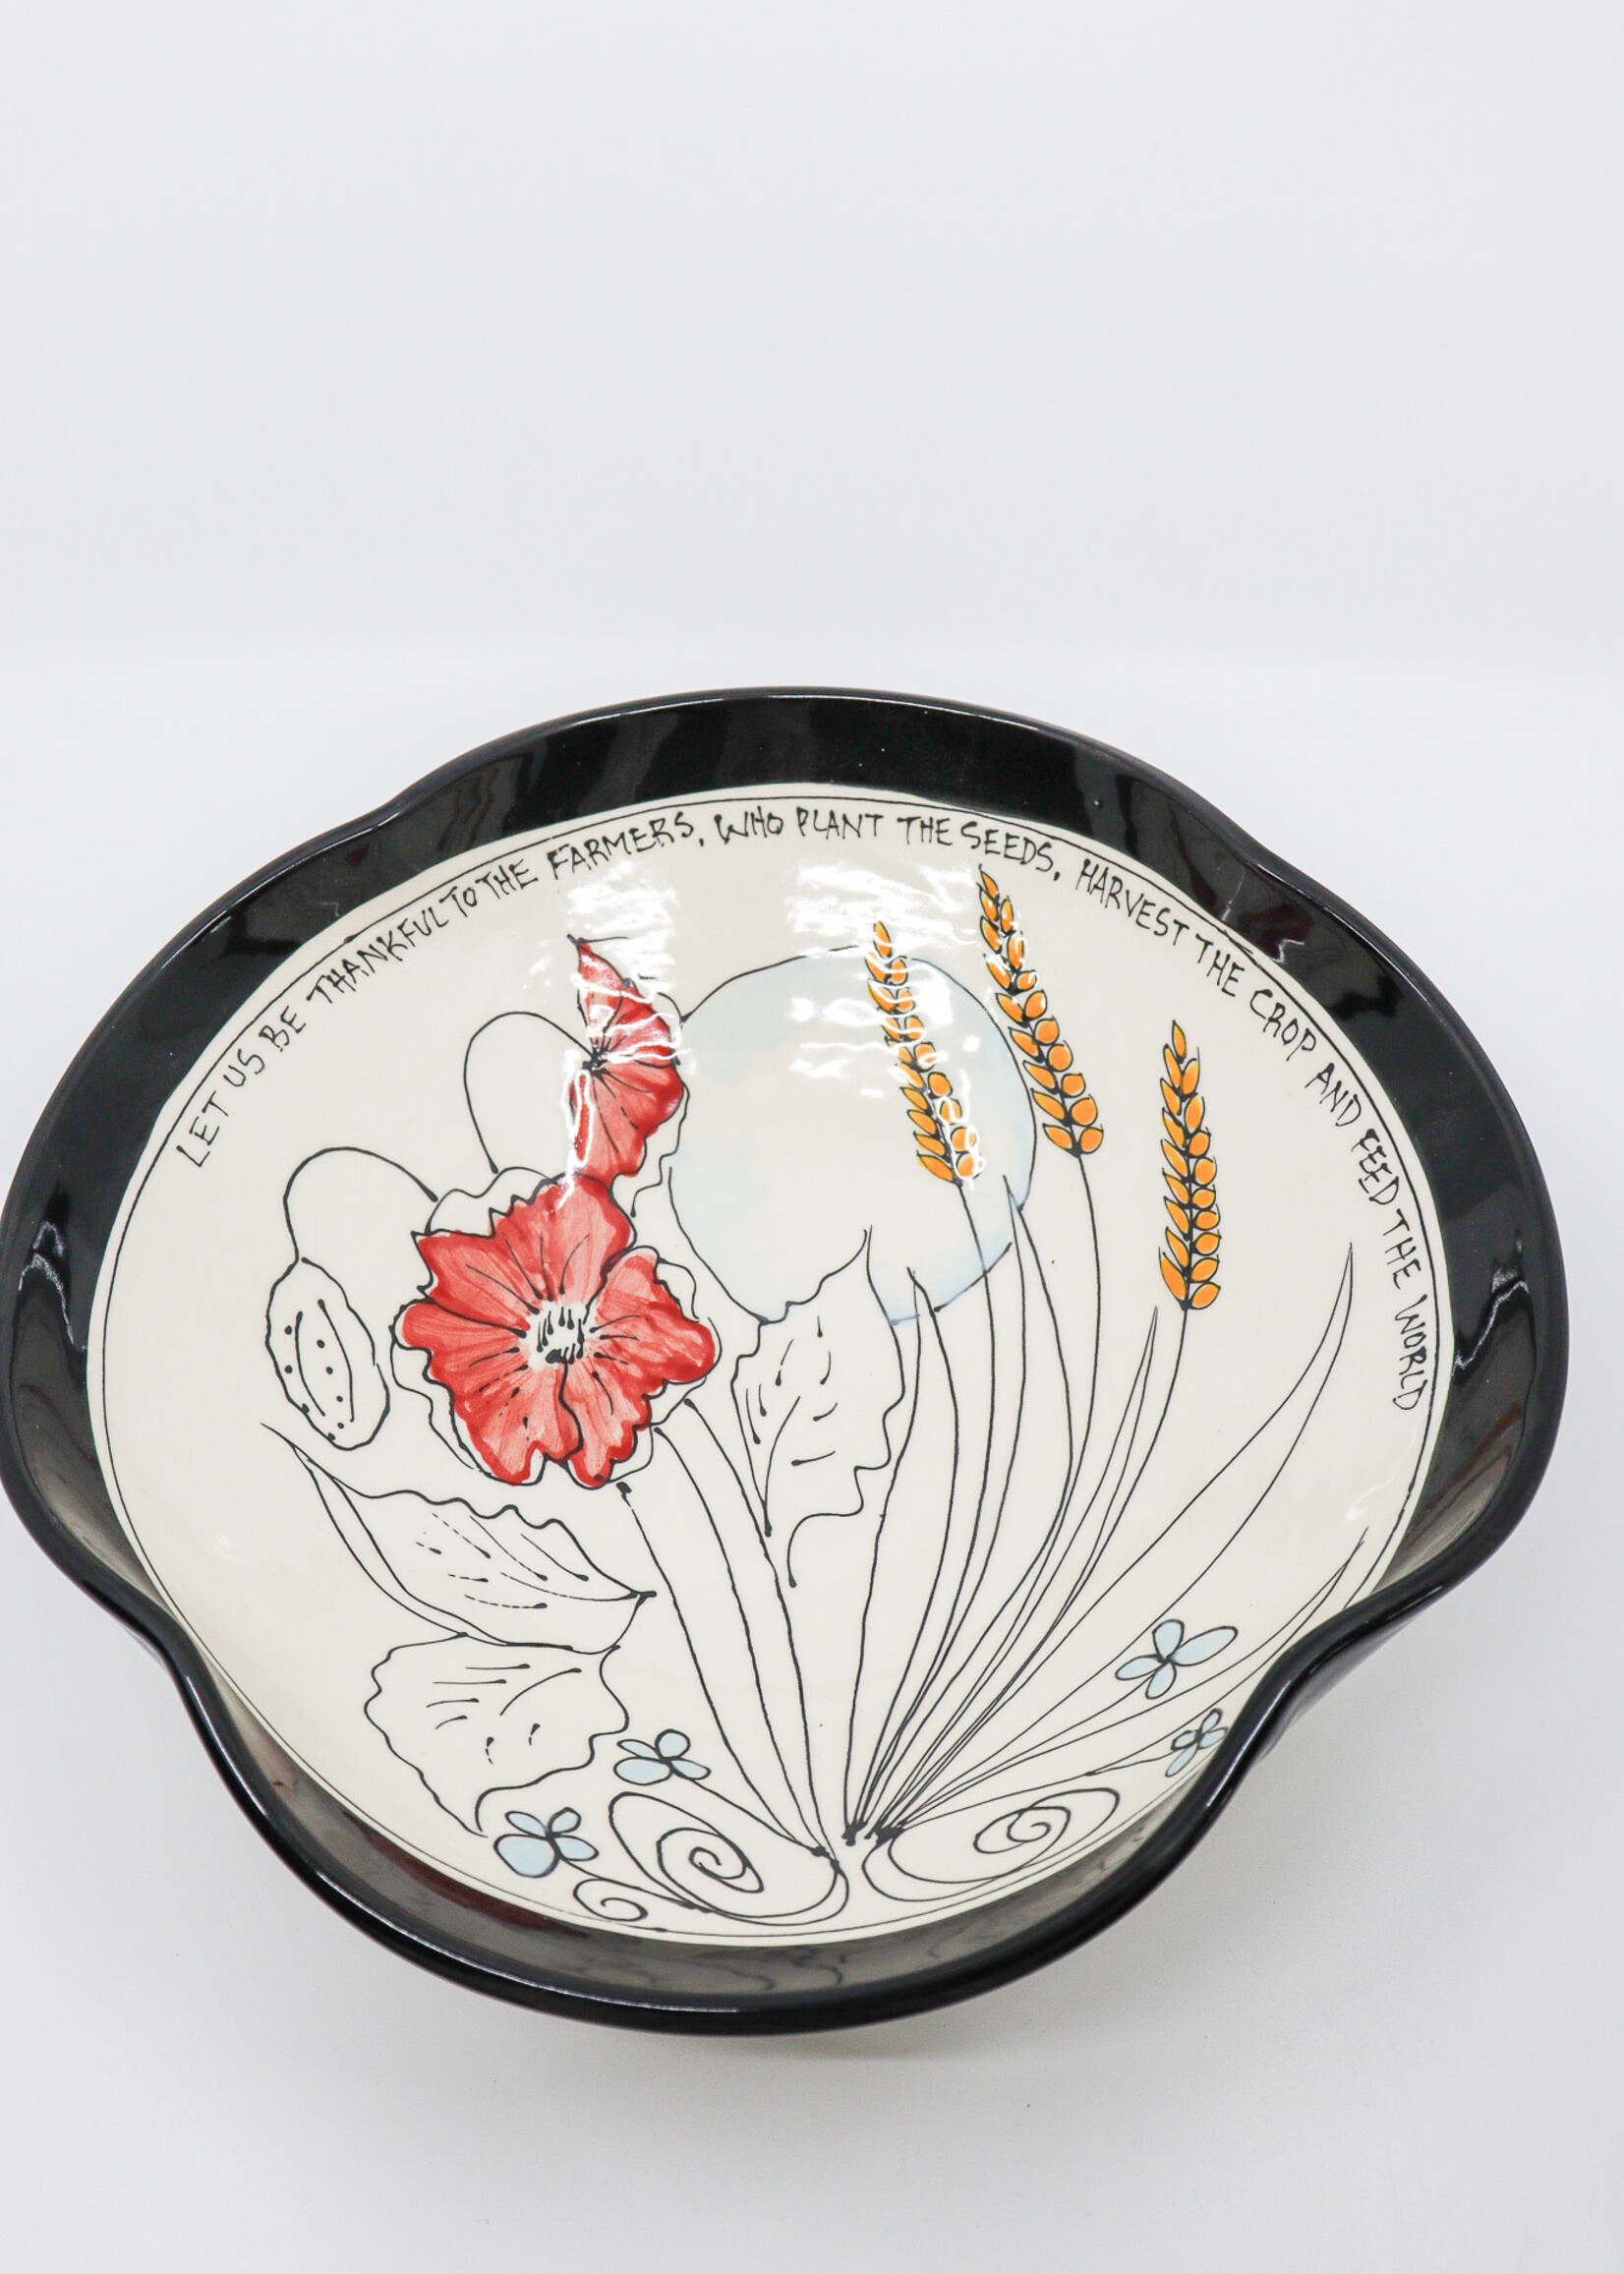 CERAMICS - 10" Bowl, Poppies and Wheat, "Let Us Be Thankful to the Farmers, Who Plant the Seeds, Harvest the Crops and Feed the World"